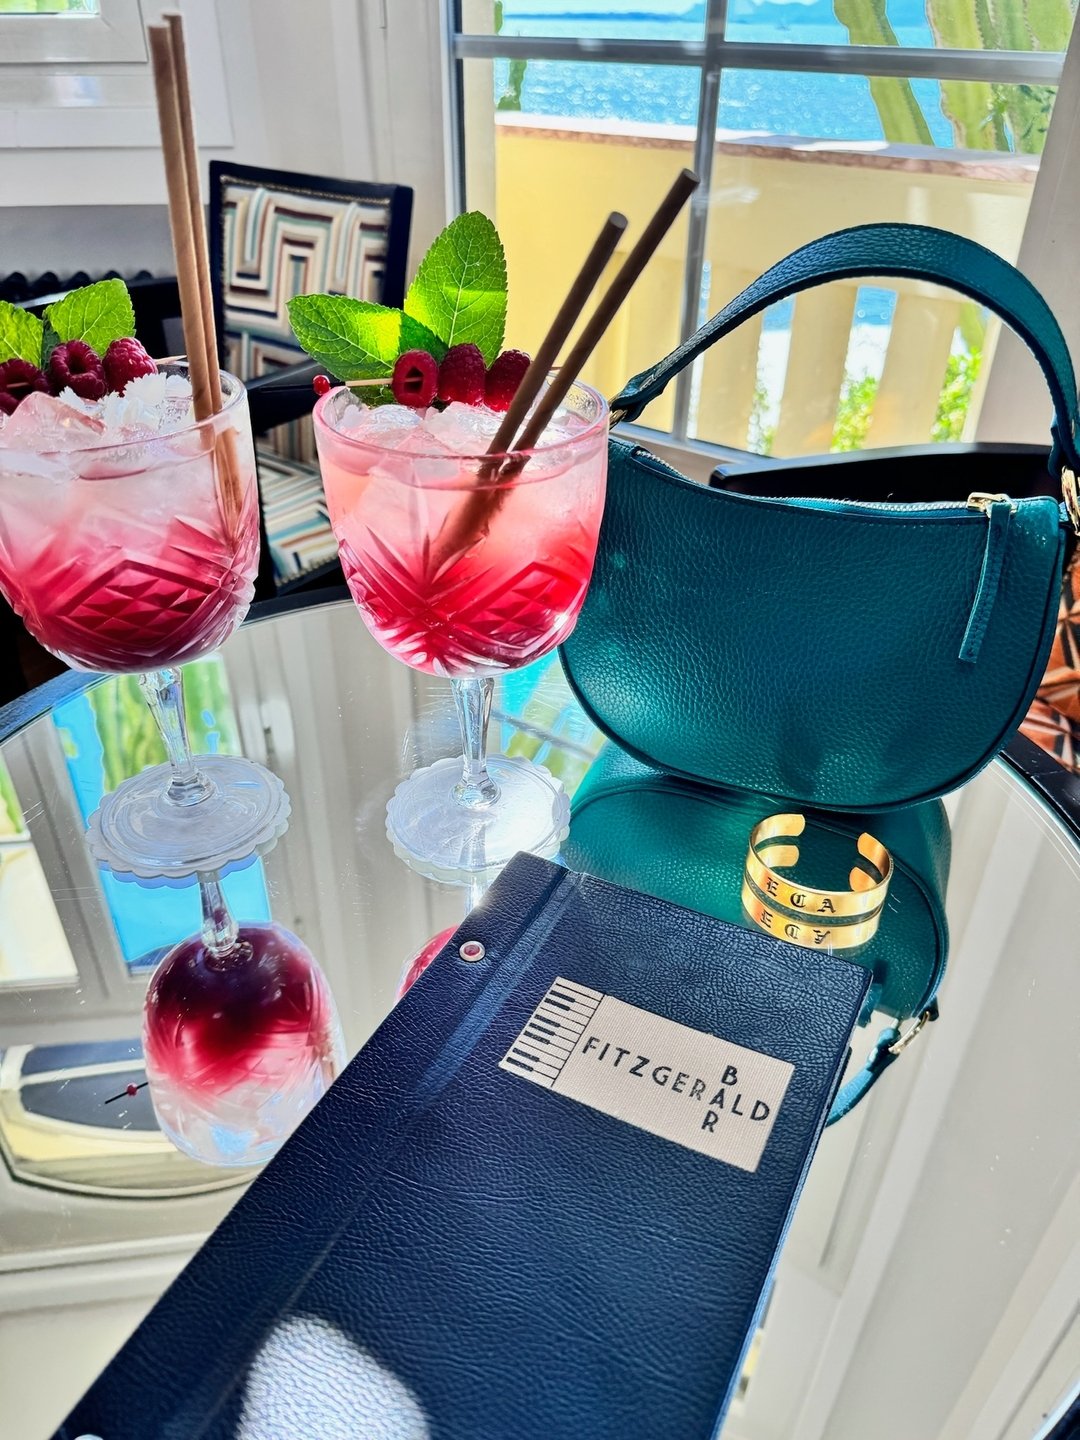 Happy World Cocktail Day! 
I grabbed this snap of our (coming soon) ExVoto mini bag a few weeks ago while visiting the @bellesrives hotel, the former house of F. Scott Fitzgerald, in Antibes, France. 

#exvotovintage #exvoto #apparel #jewelry #brand 